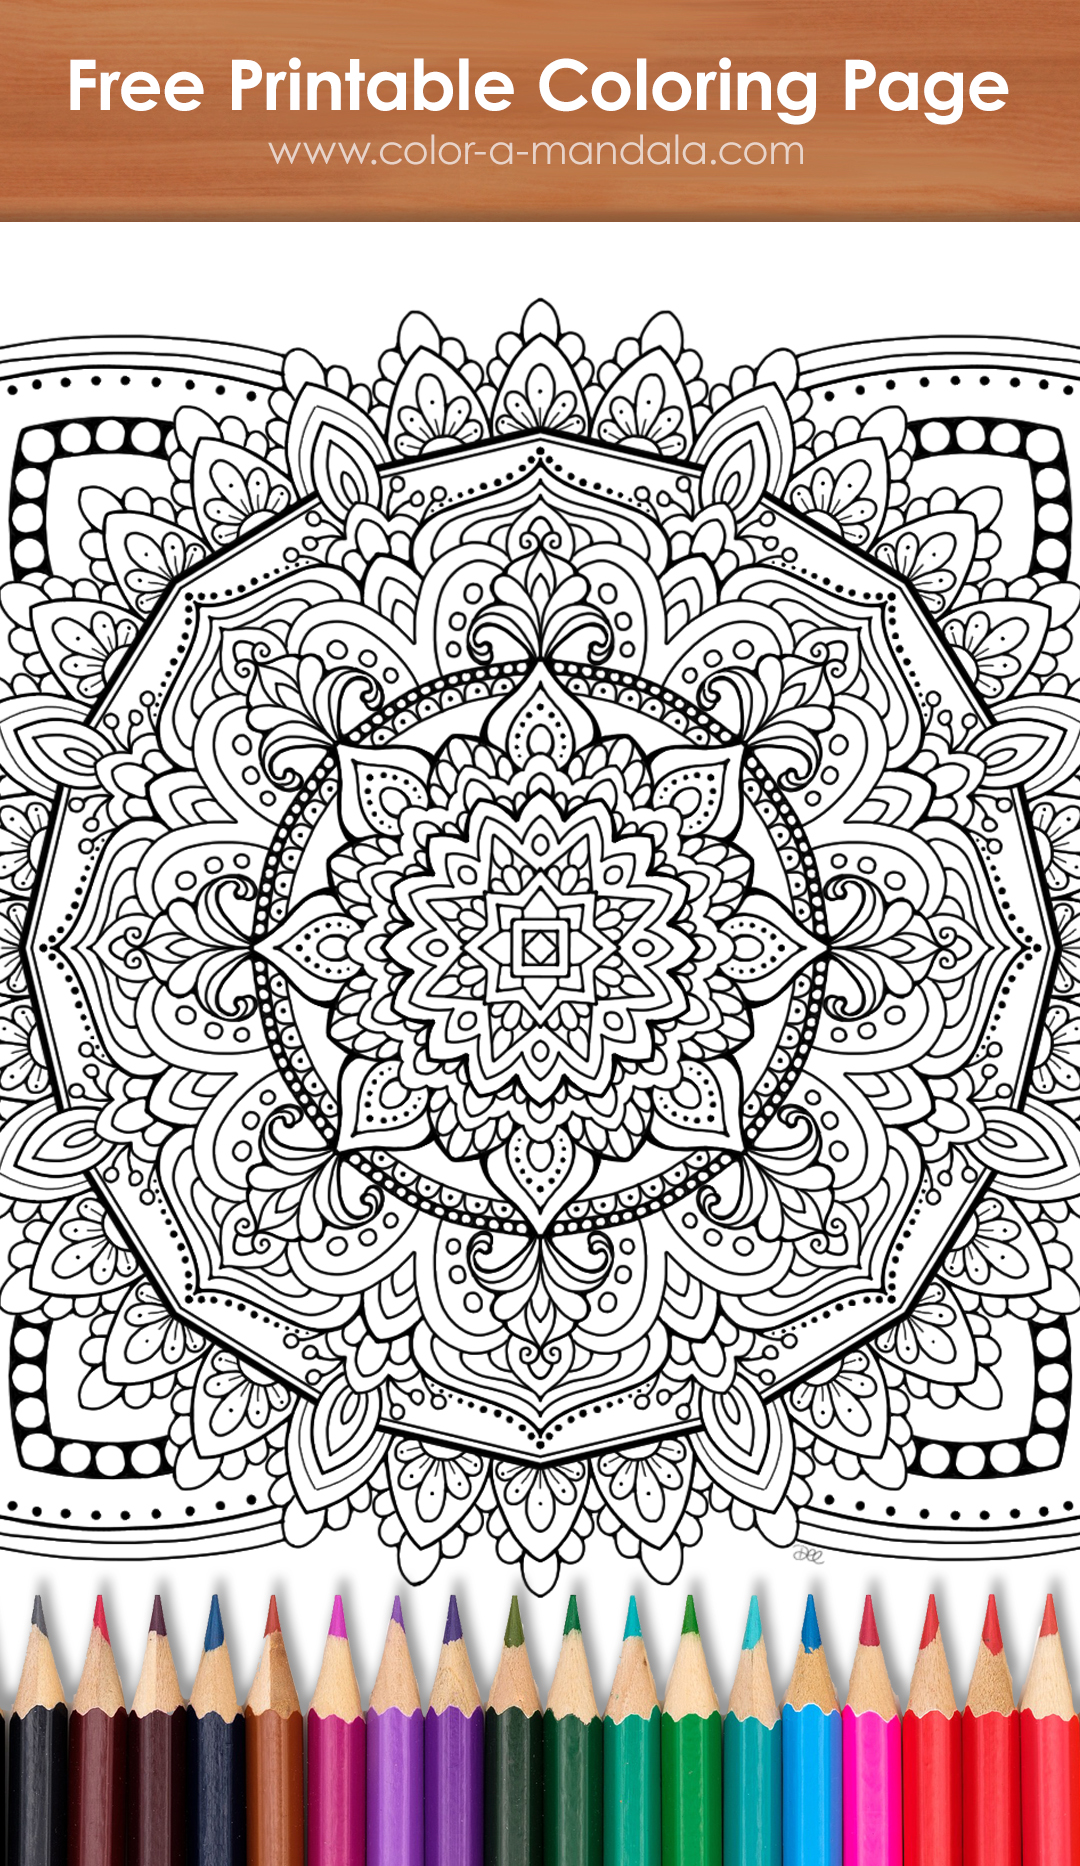 Image of a coloring page with an intricate mandala illustration.